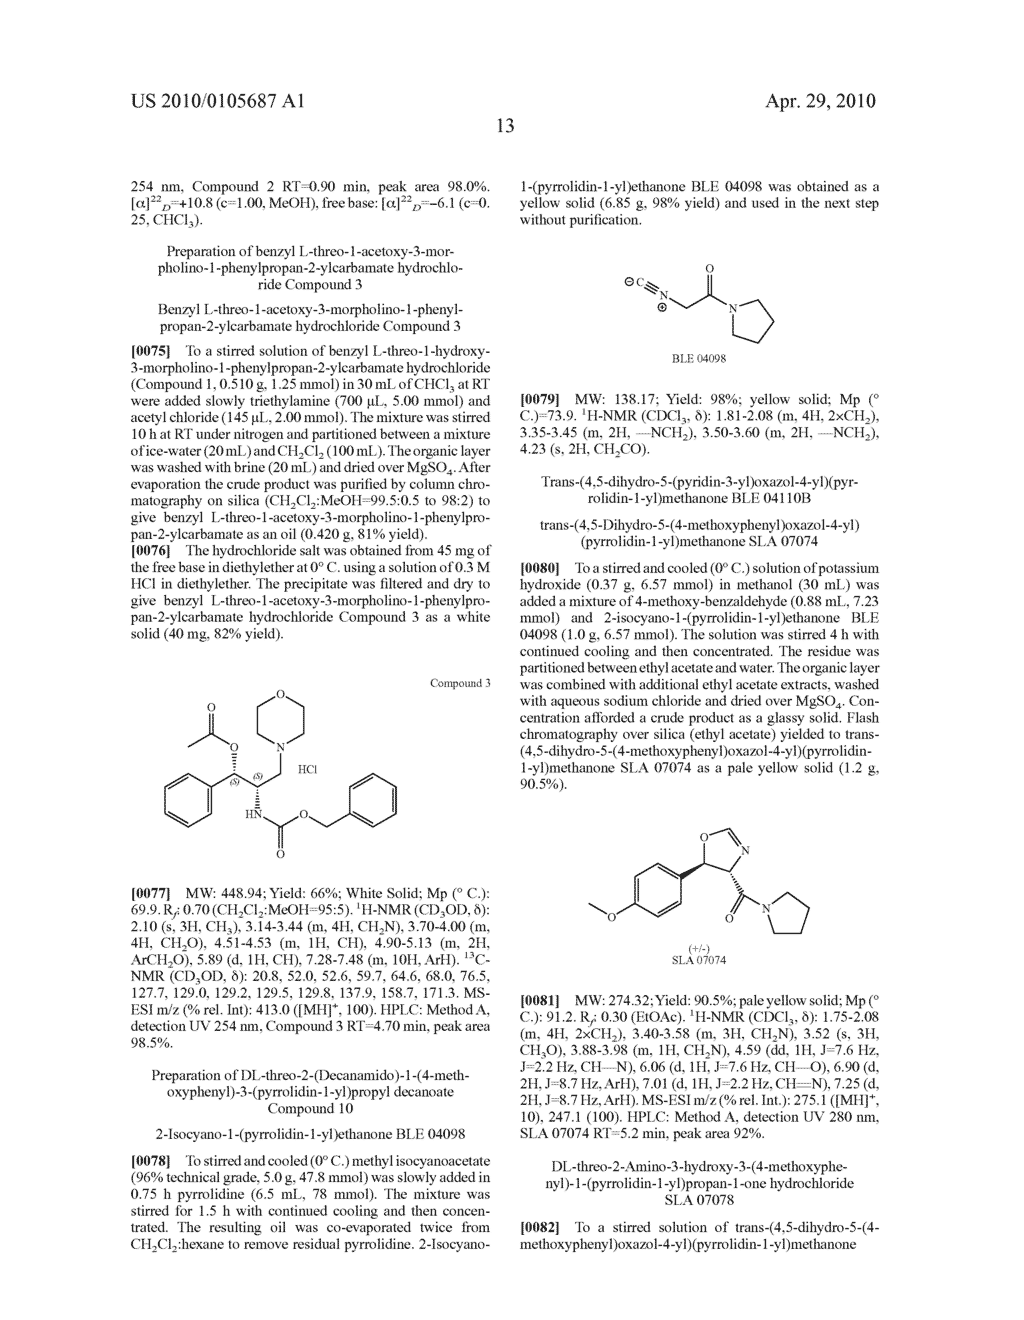 METHODS FOR TREATING COGNITIVE DISORDERS USING 1-ARYL-1-HYDROXY-2,3-DIAMINO-PROPYL AMINES, 1-HETEROARYL-1-HYDROXY-2,3-DIAMINO-PROPYL AMINES AND RELATED COMPOUNDS - diagram, schematic, and image 14